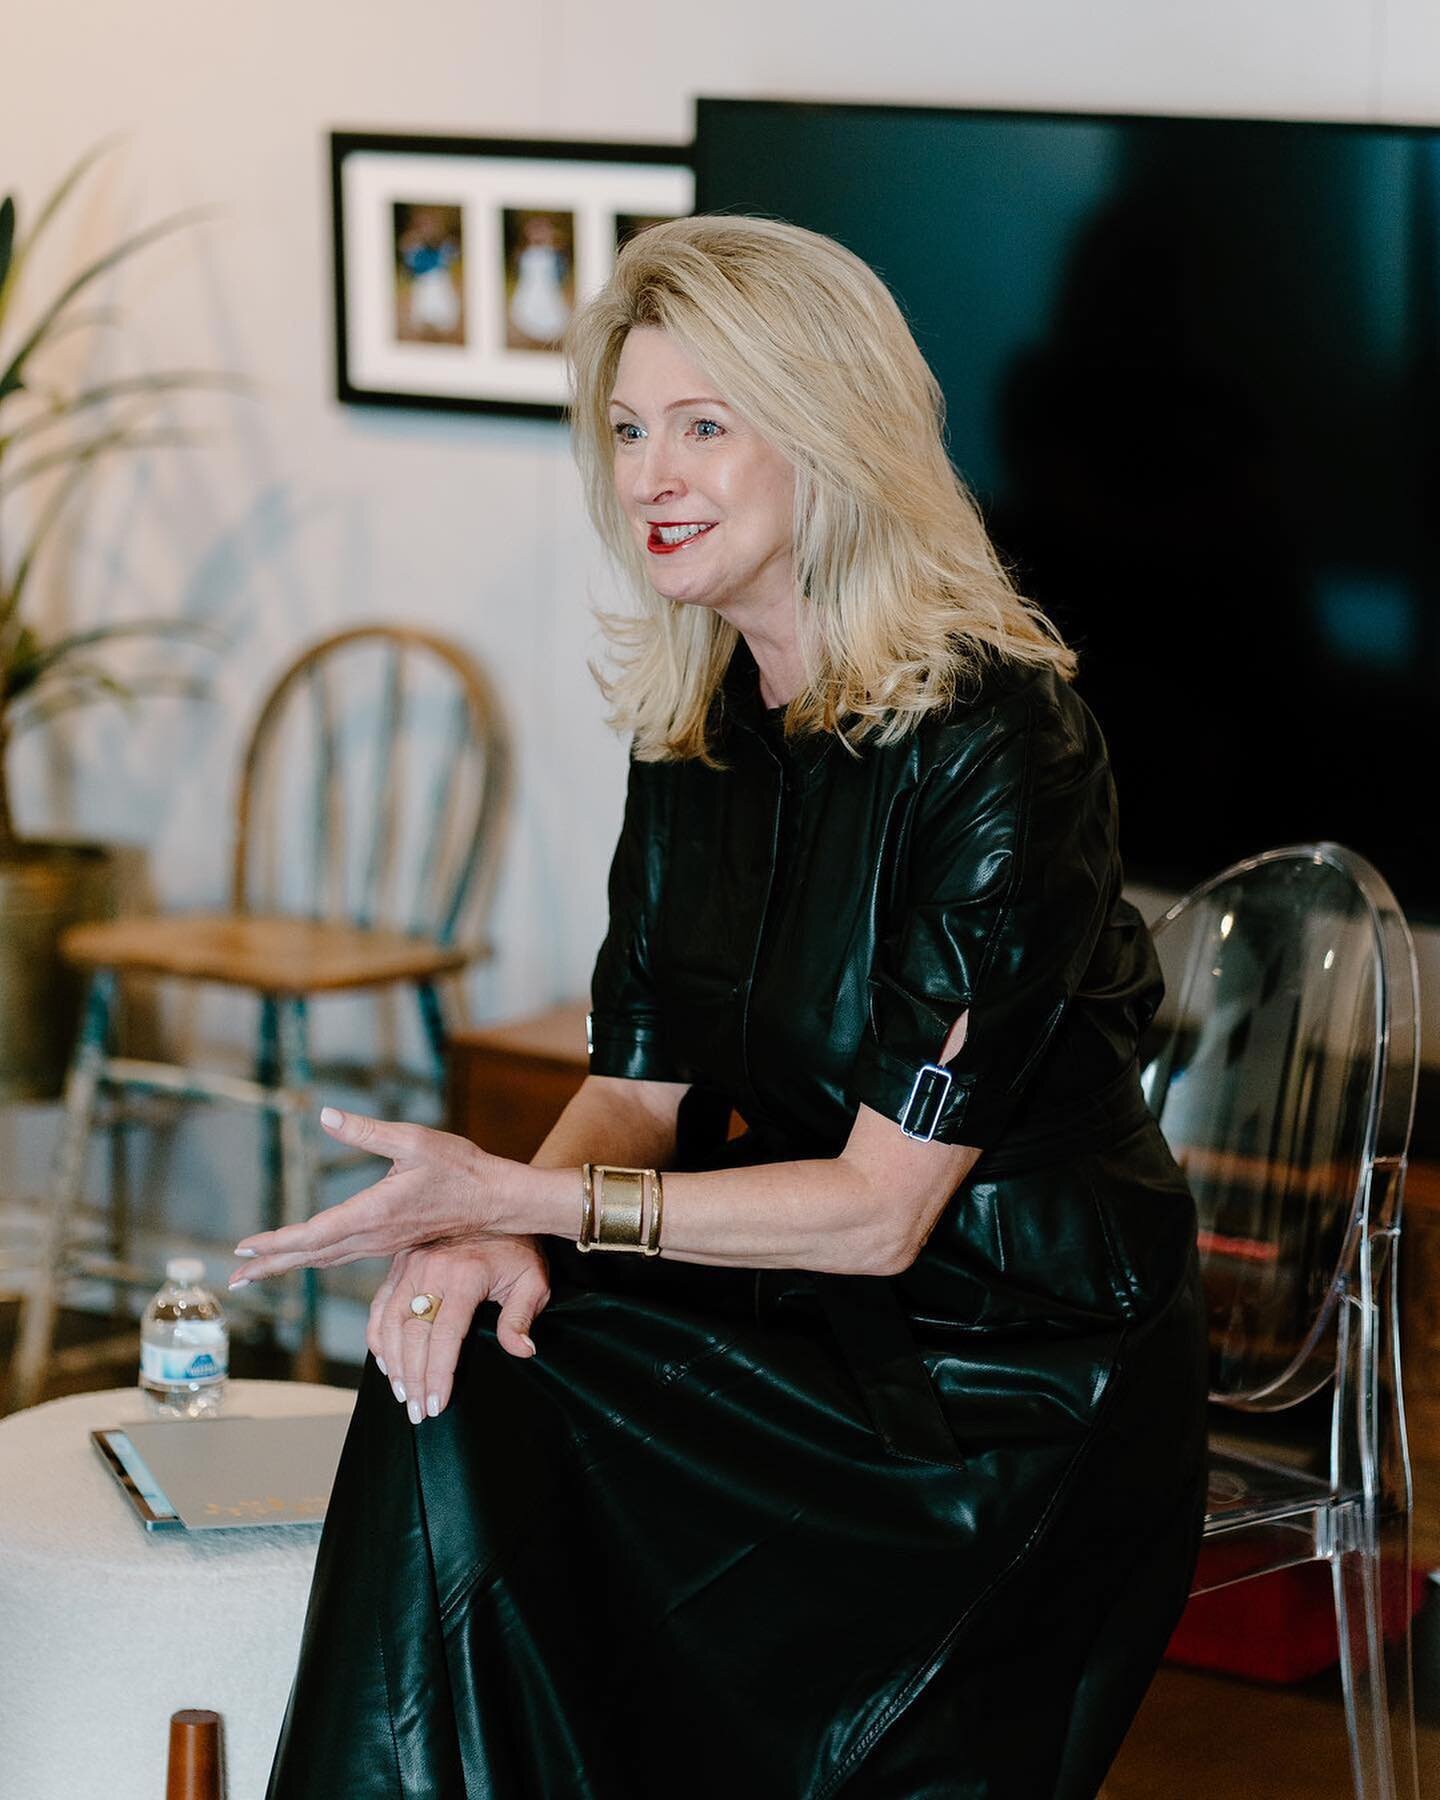 A week ago at this time I was with @risingtidelowcountry in Savannah, talking about the Power of a Personal Retreat. We had so much fun @thebullstreetlight with @angelahopperphoto.

It's the perfect time of year to be thinking about creating your own